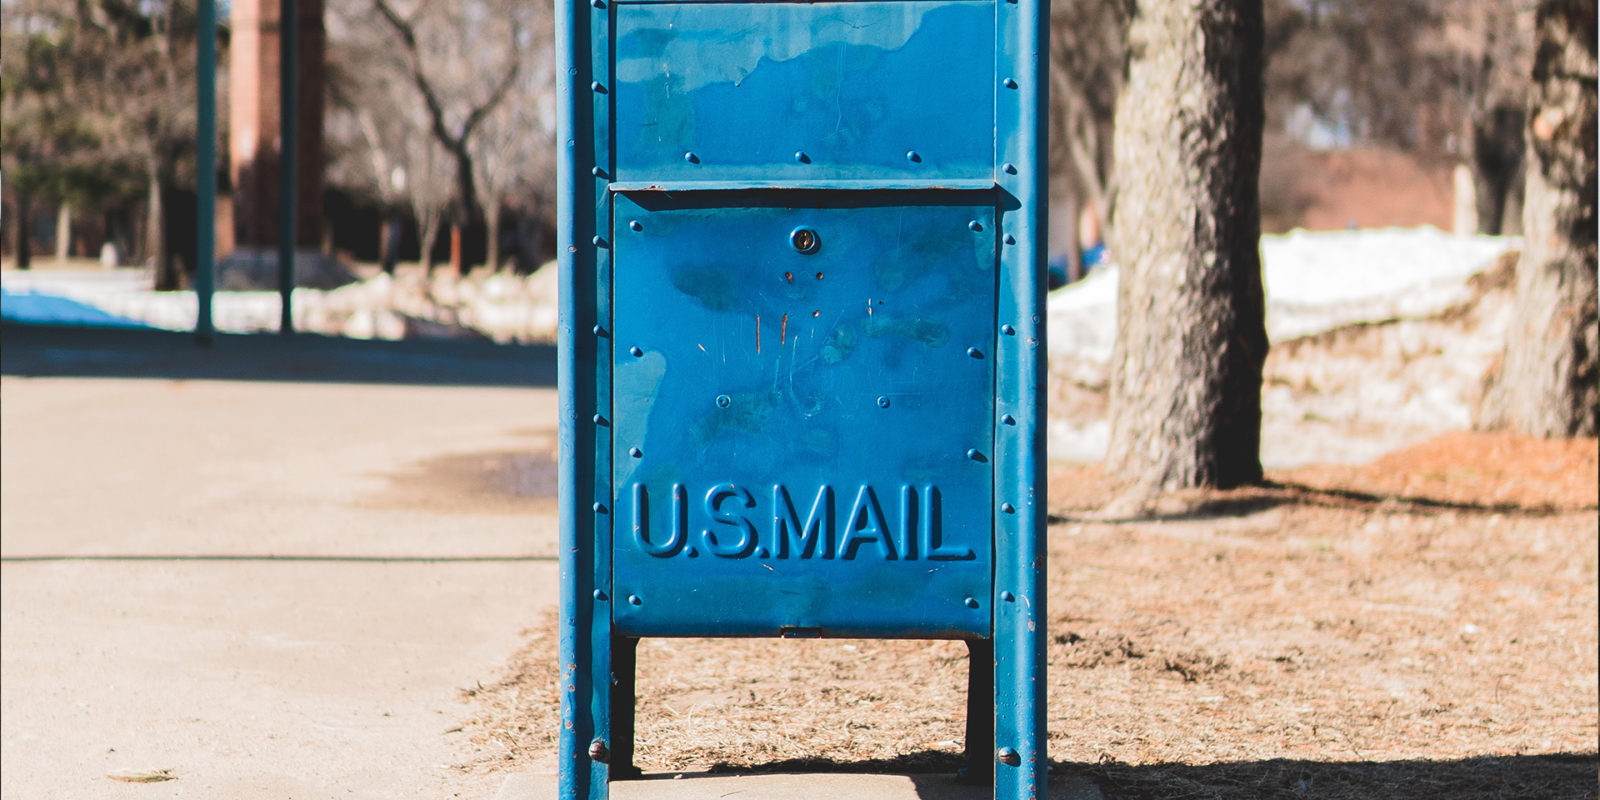 Mail box - How Netflix used its vision statement to guide its transition from mail-in DVDs to streaming video